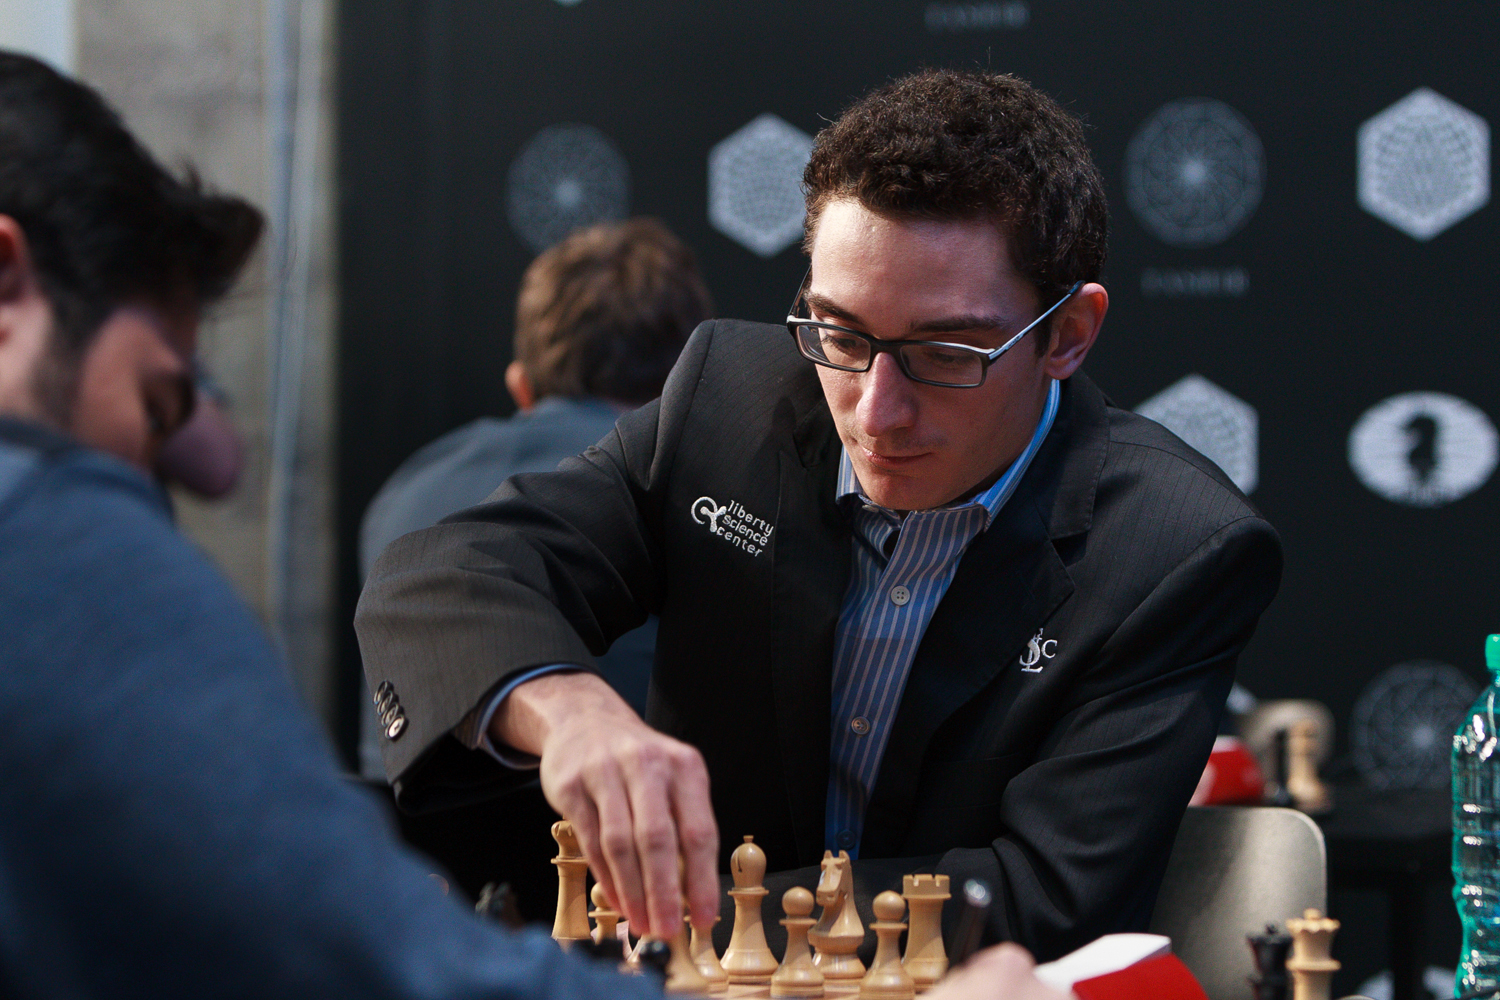 Breaking: Fabiano Caruana To Play For USA (Updated) 